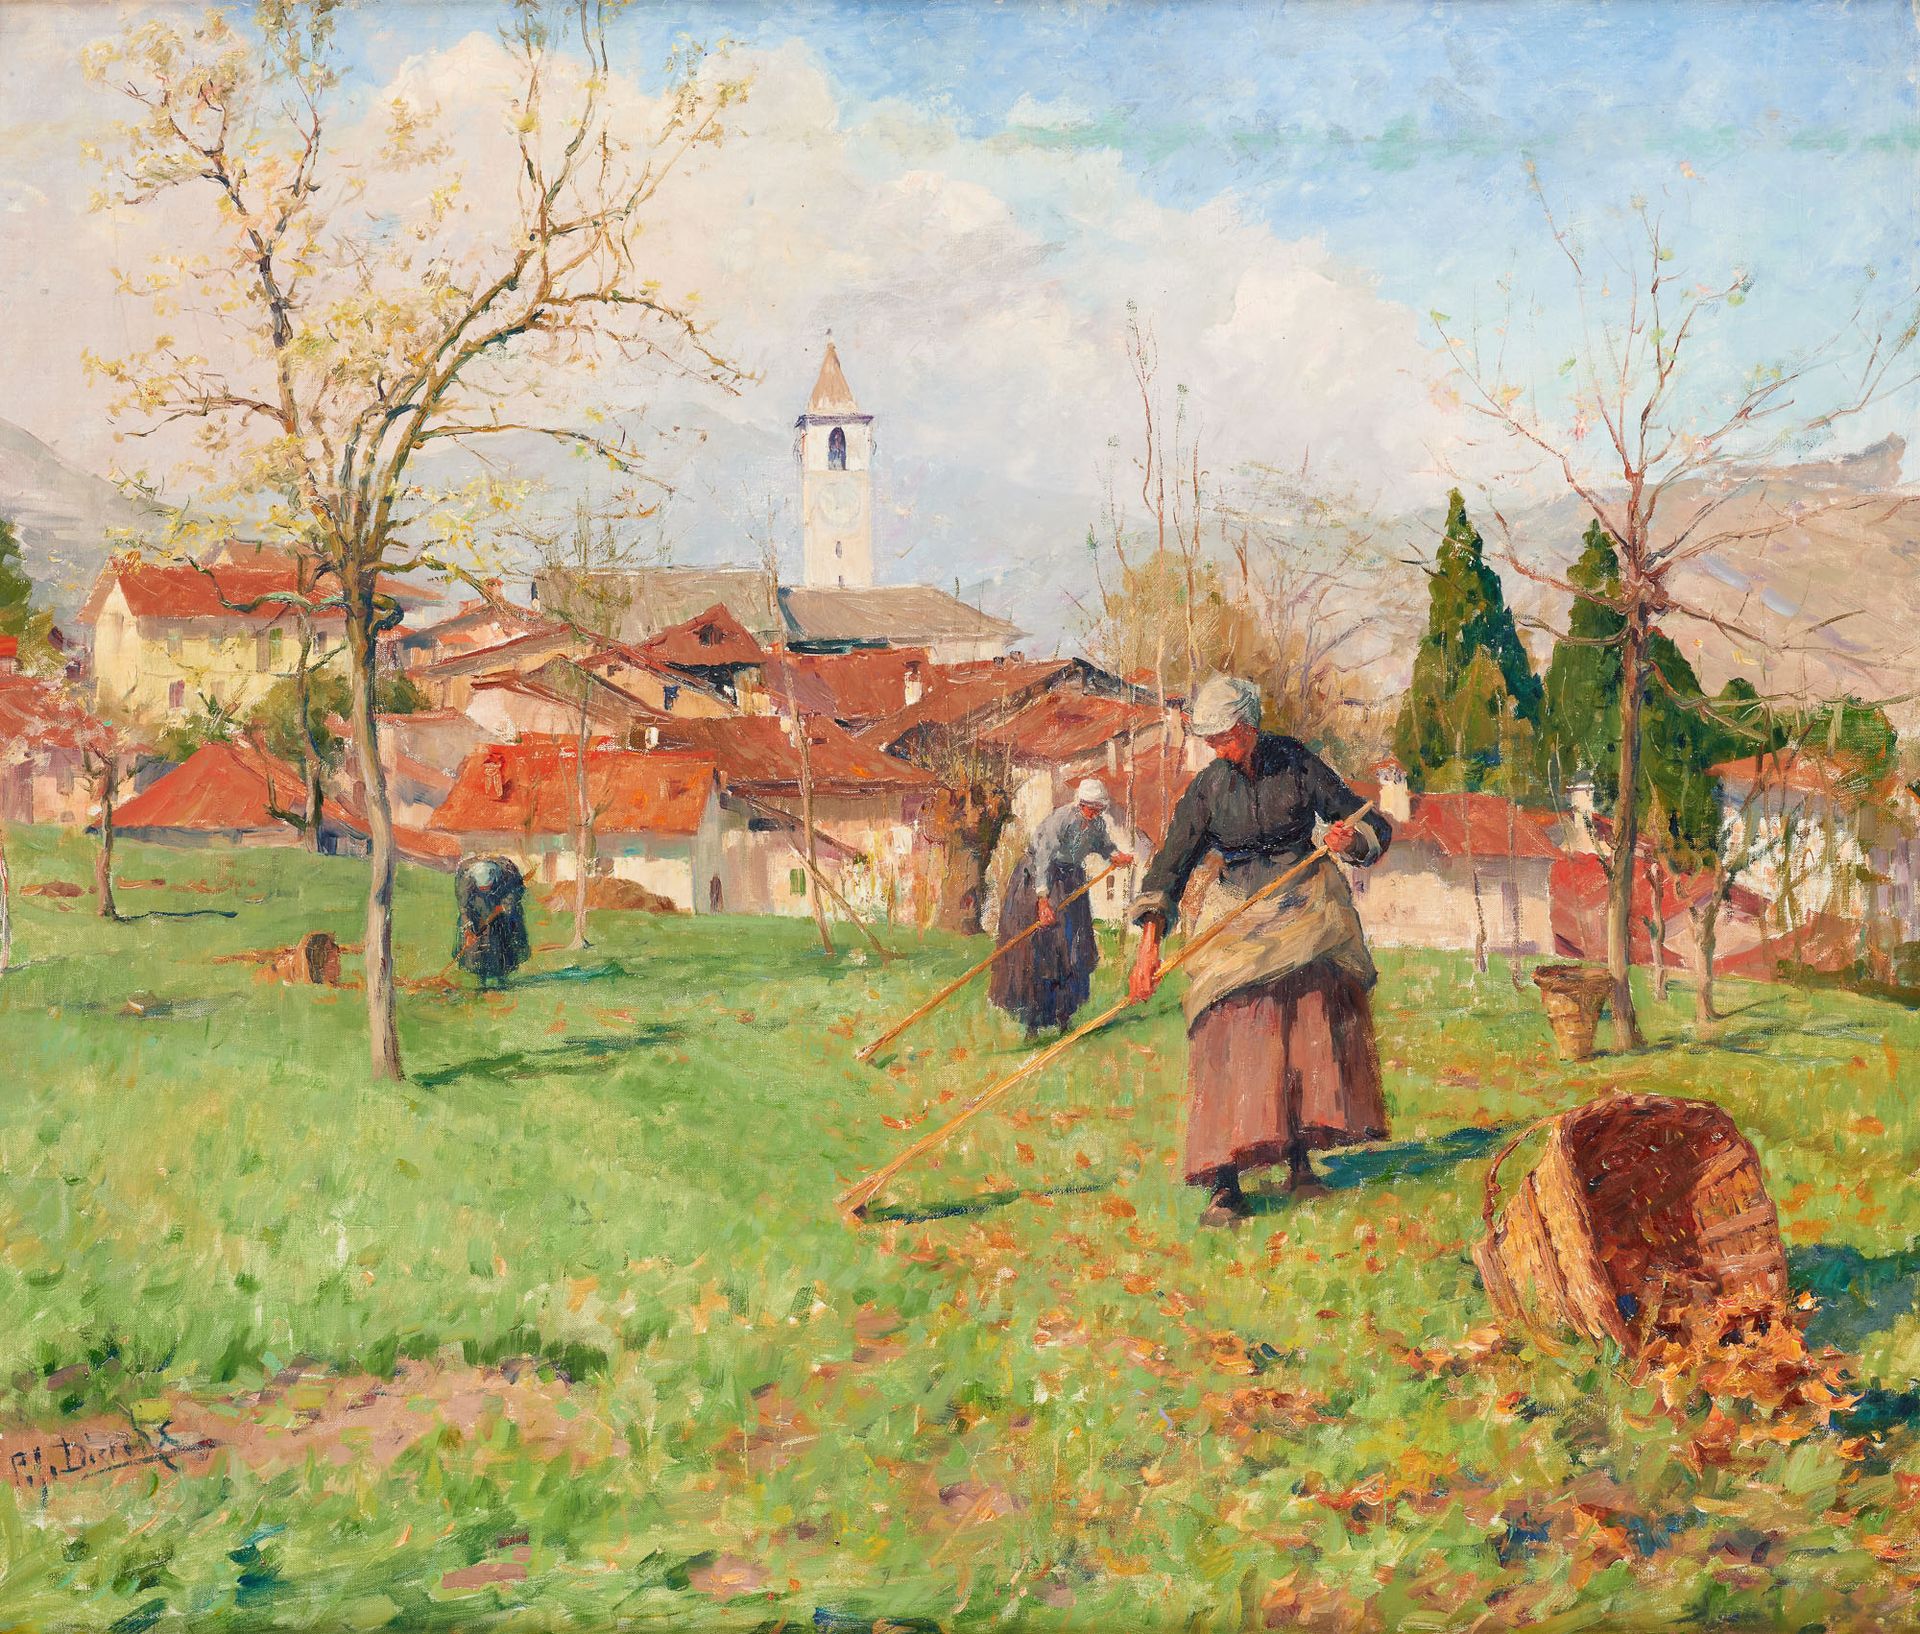 Pierre Jacques DIERCKX École belge (1855-1947) Oil on canvas: The sweepers of le&hellip;